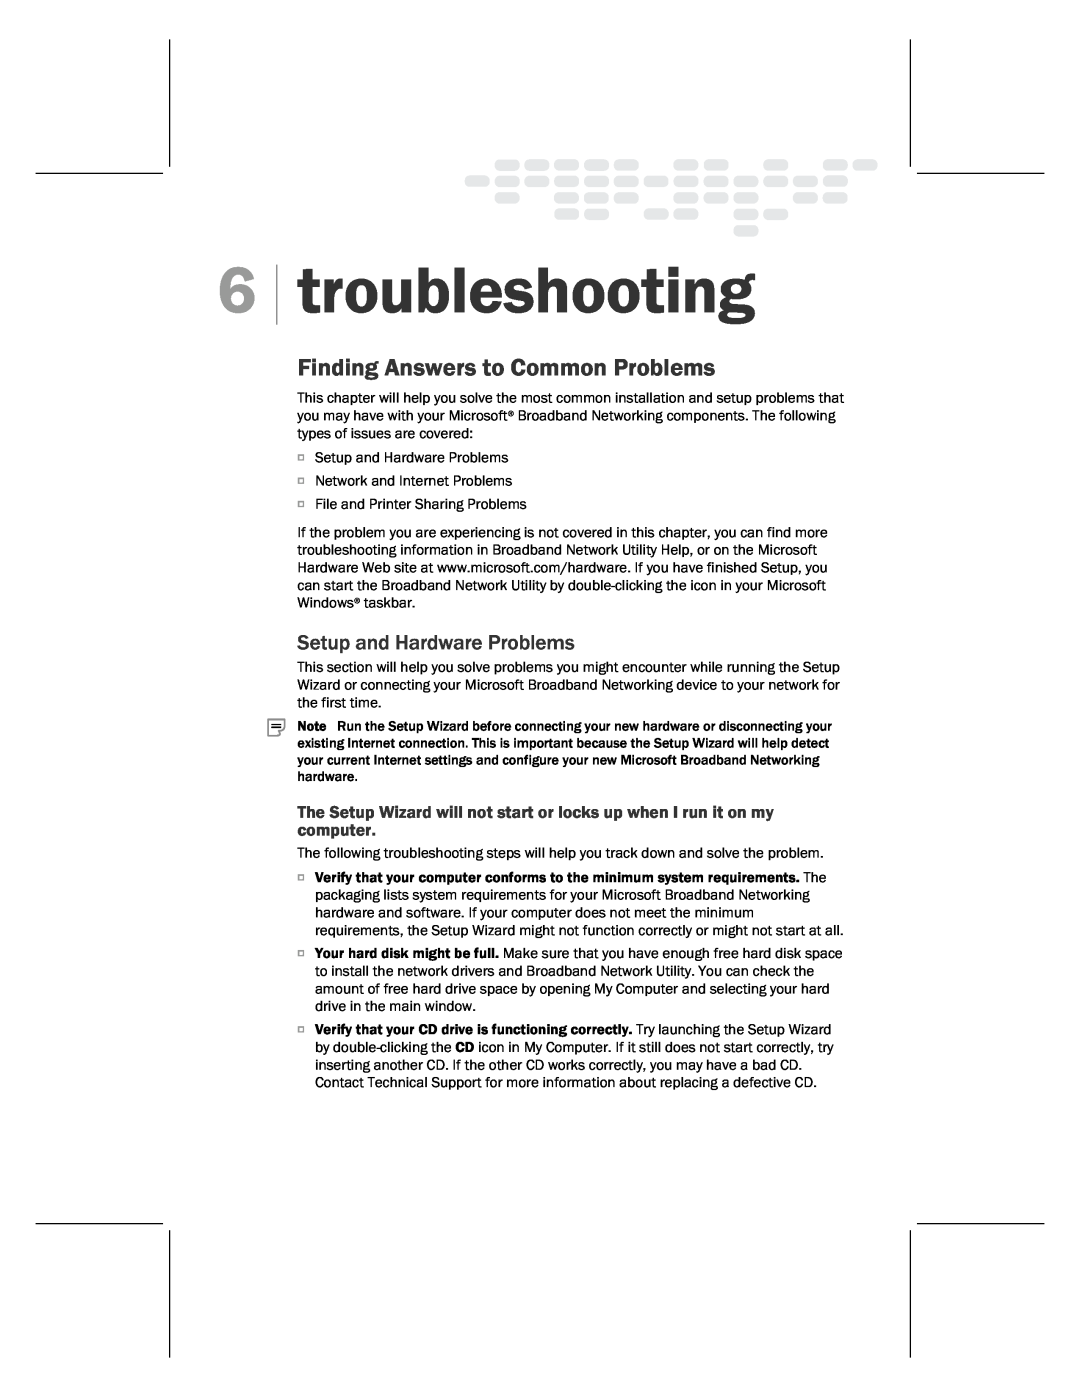 Microsoft MN-820 manual troubleshooting, Finding Answers to Common Problems, Setup and Hardware Problems 